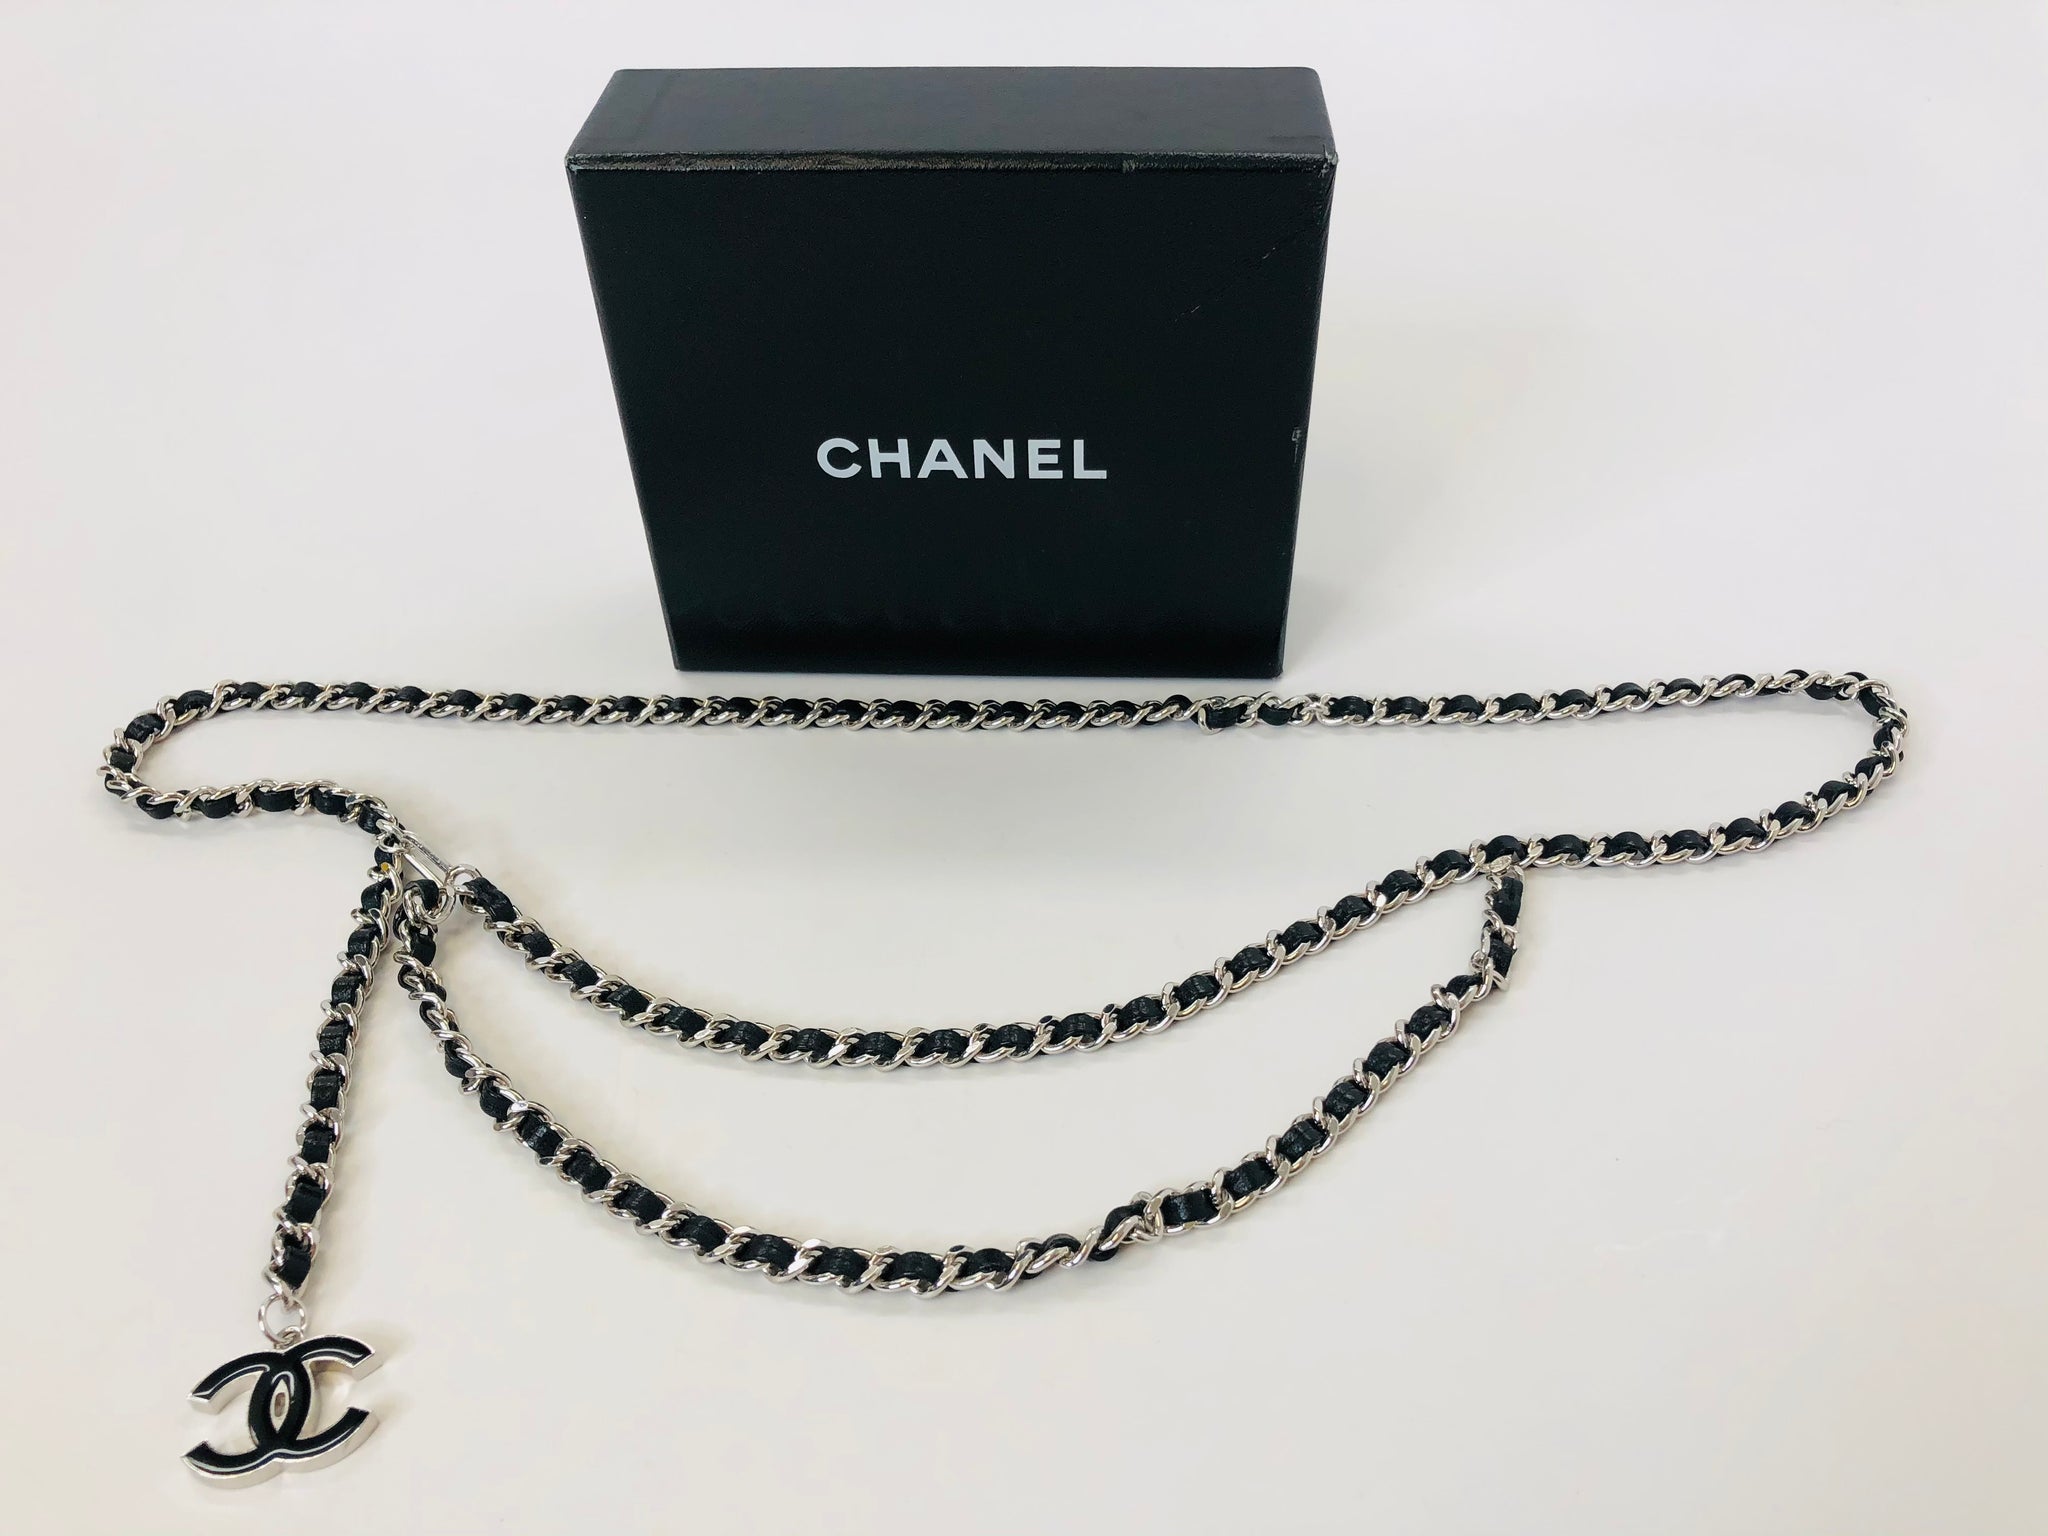 Chanel Back Chain Leather Wide Belt Size 85/34